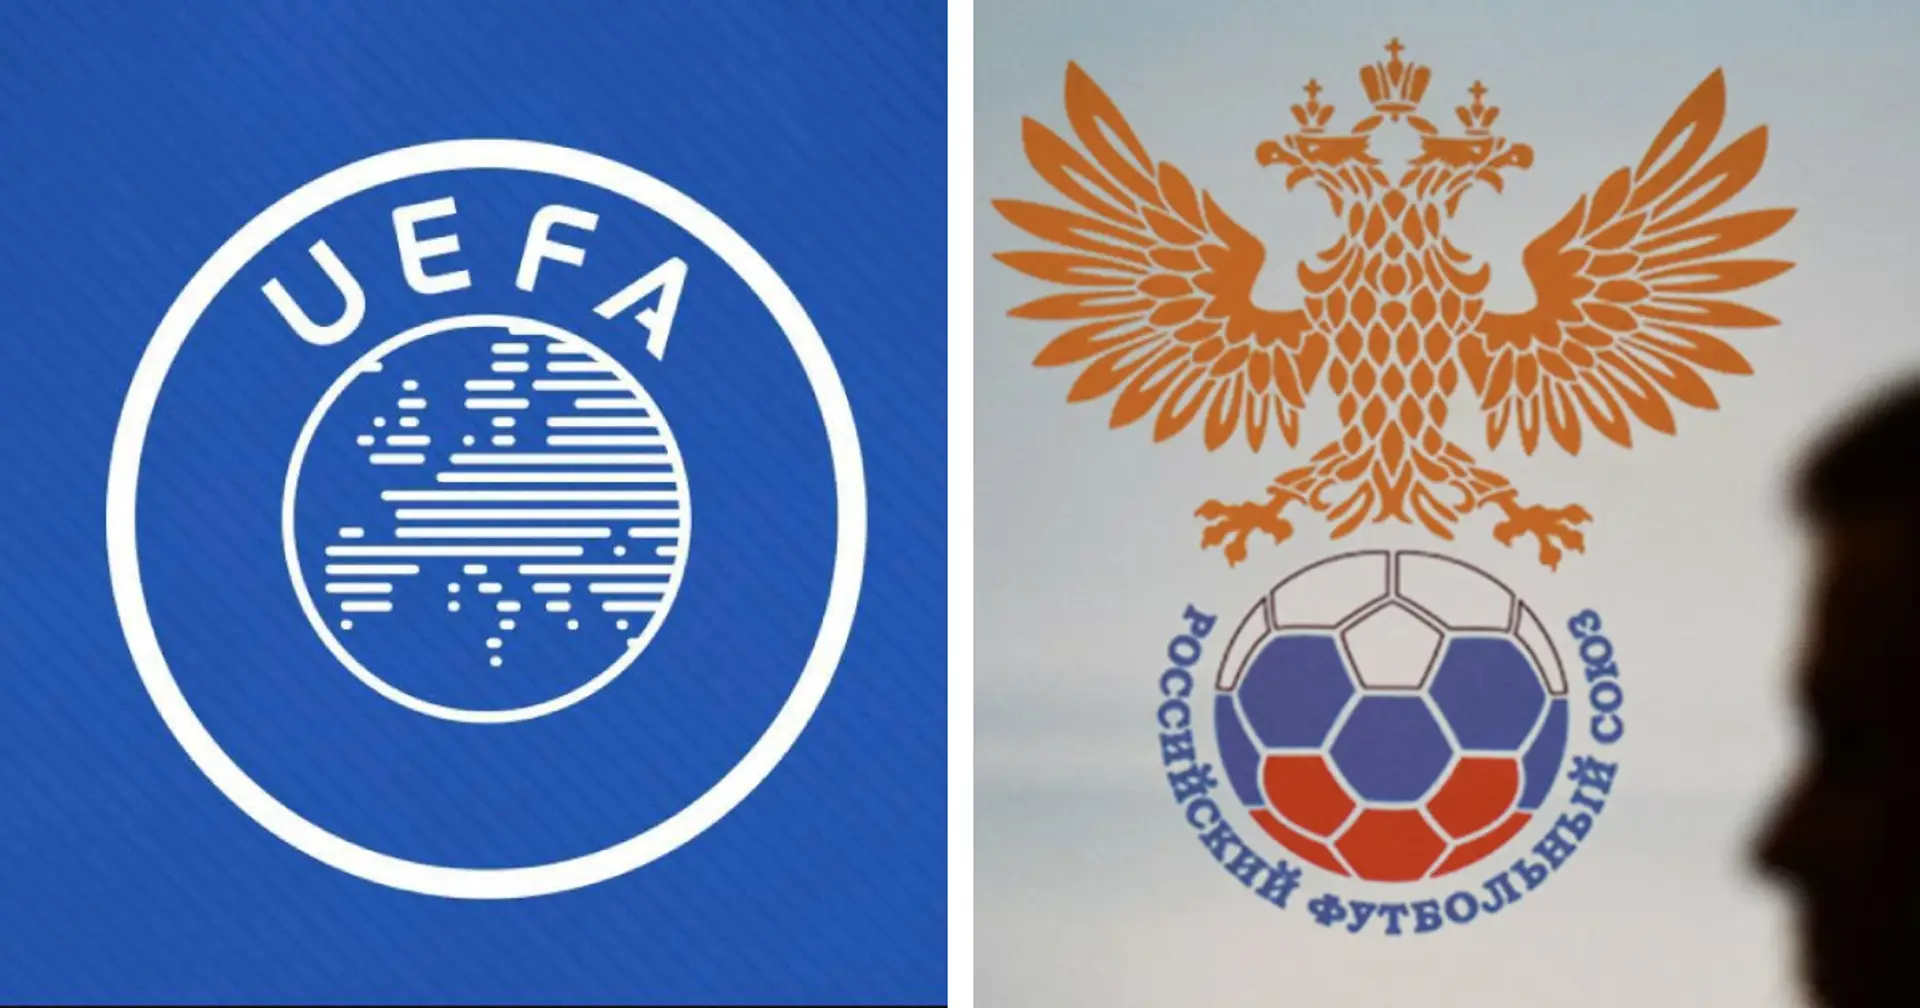 2 more European countries join boycott of Russia national football team